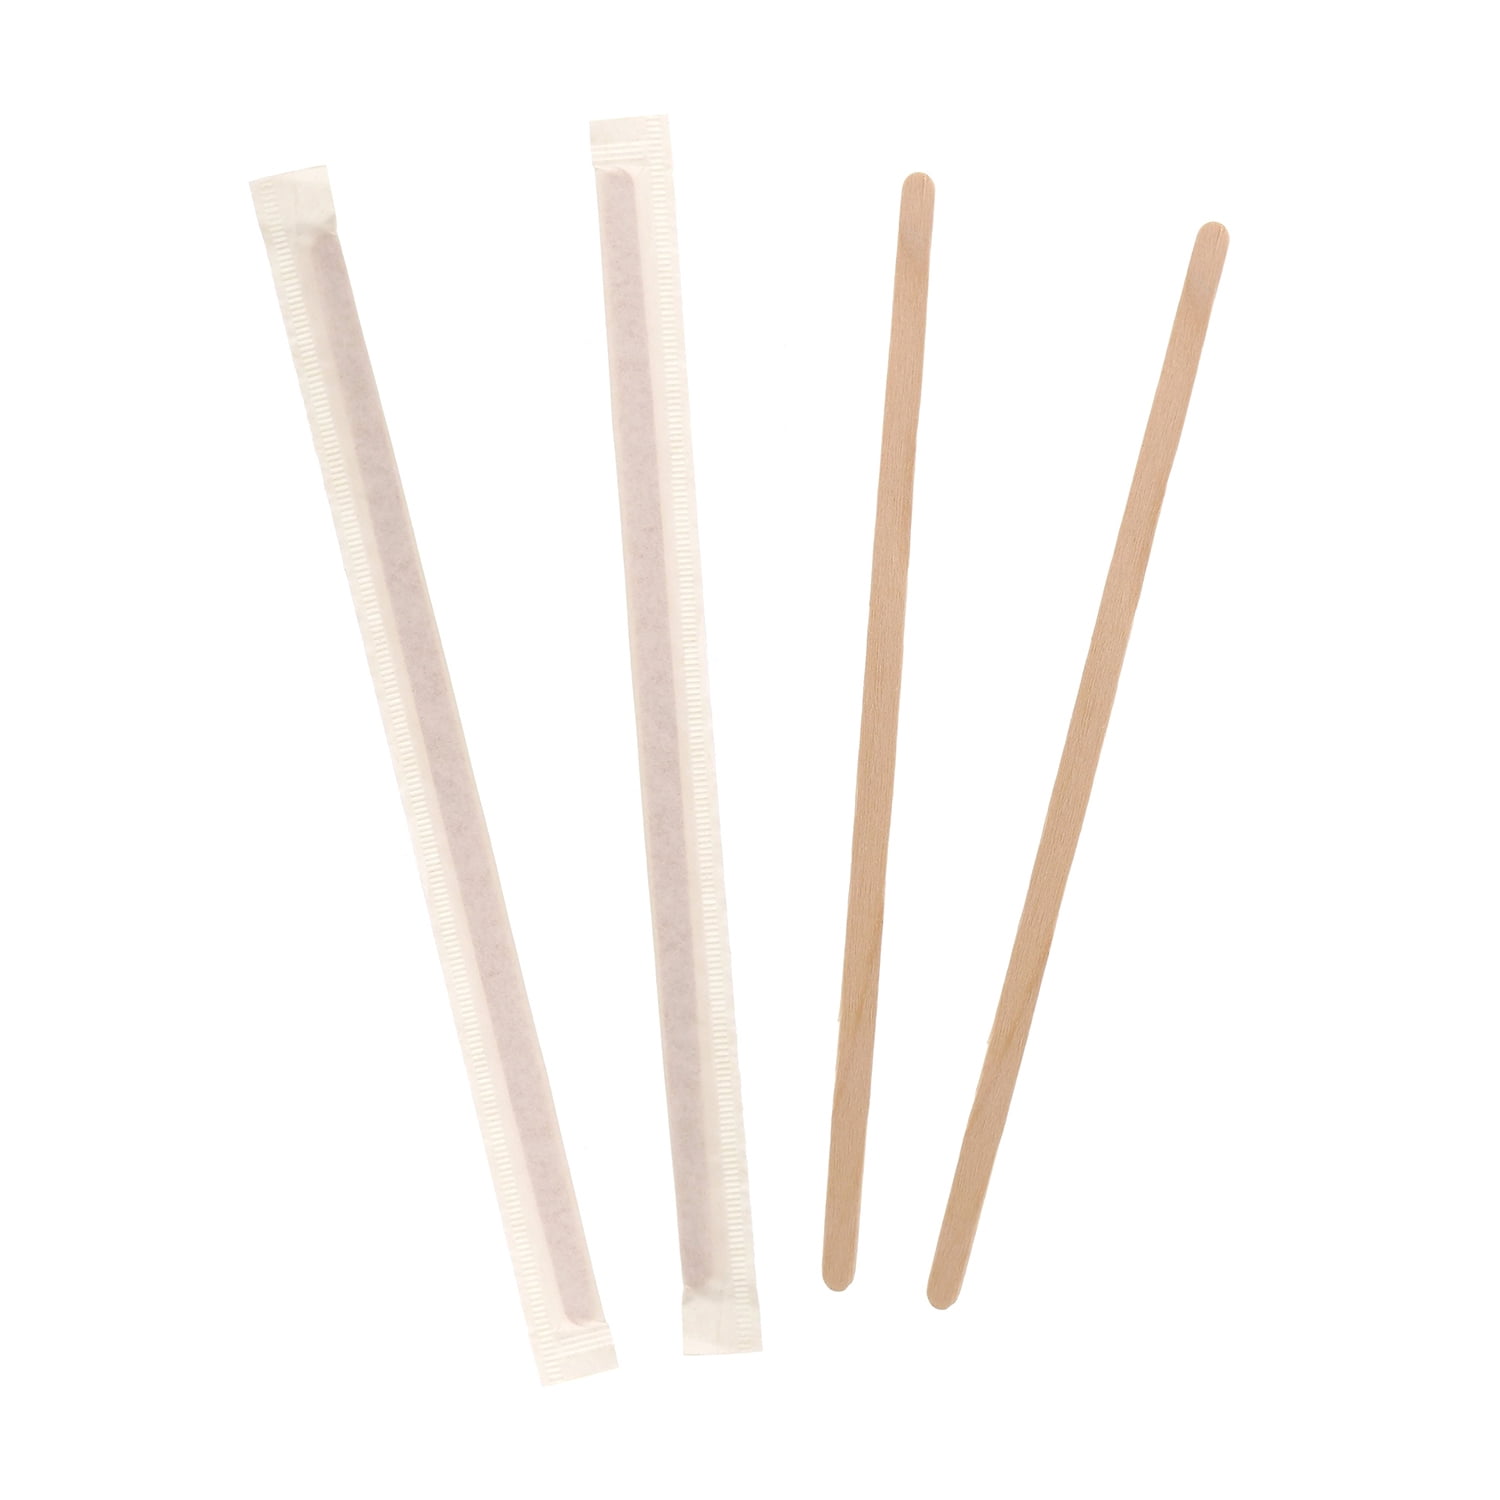 1000 Wooden Birch Coffee Stirrers 5.5" Eco Friendly Royal FREE SHIP US ONLY 